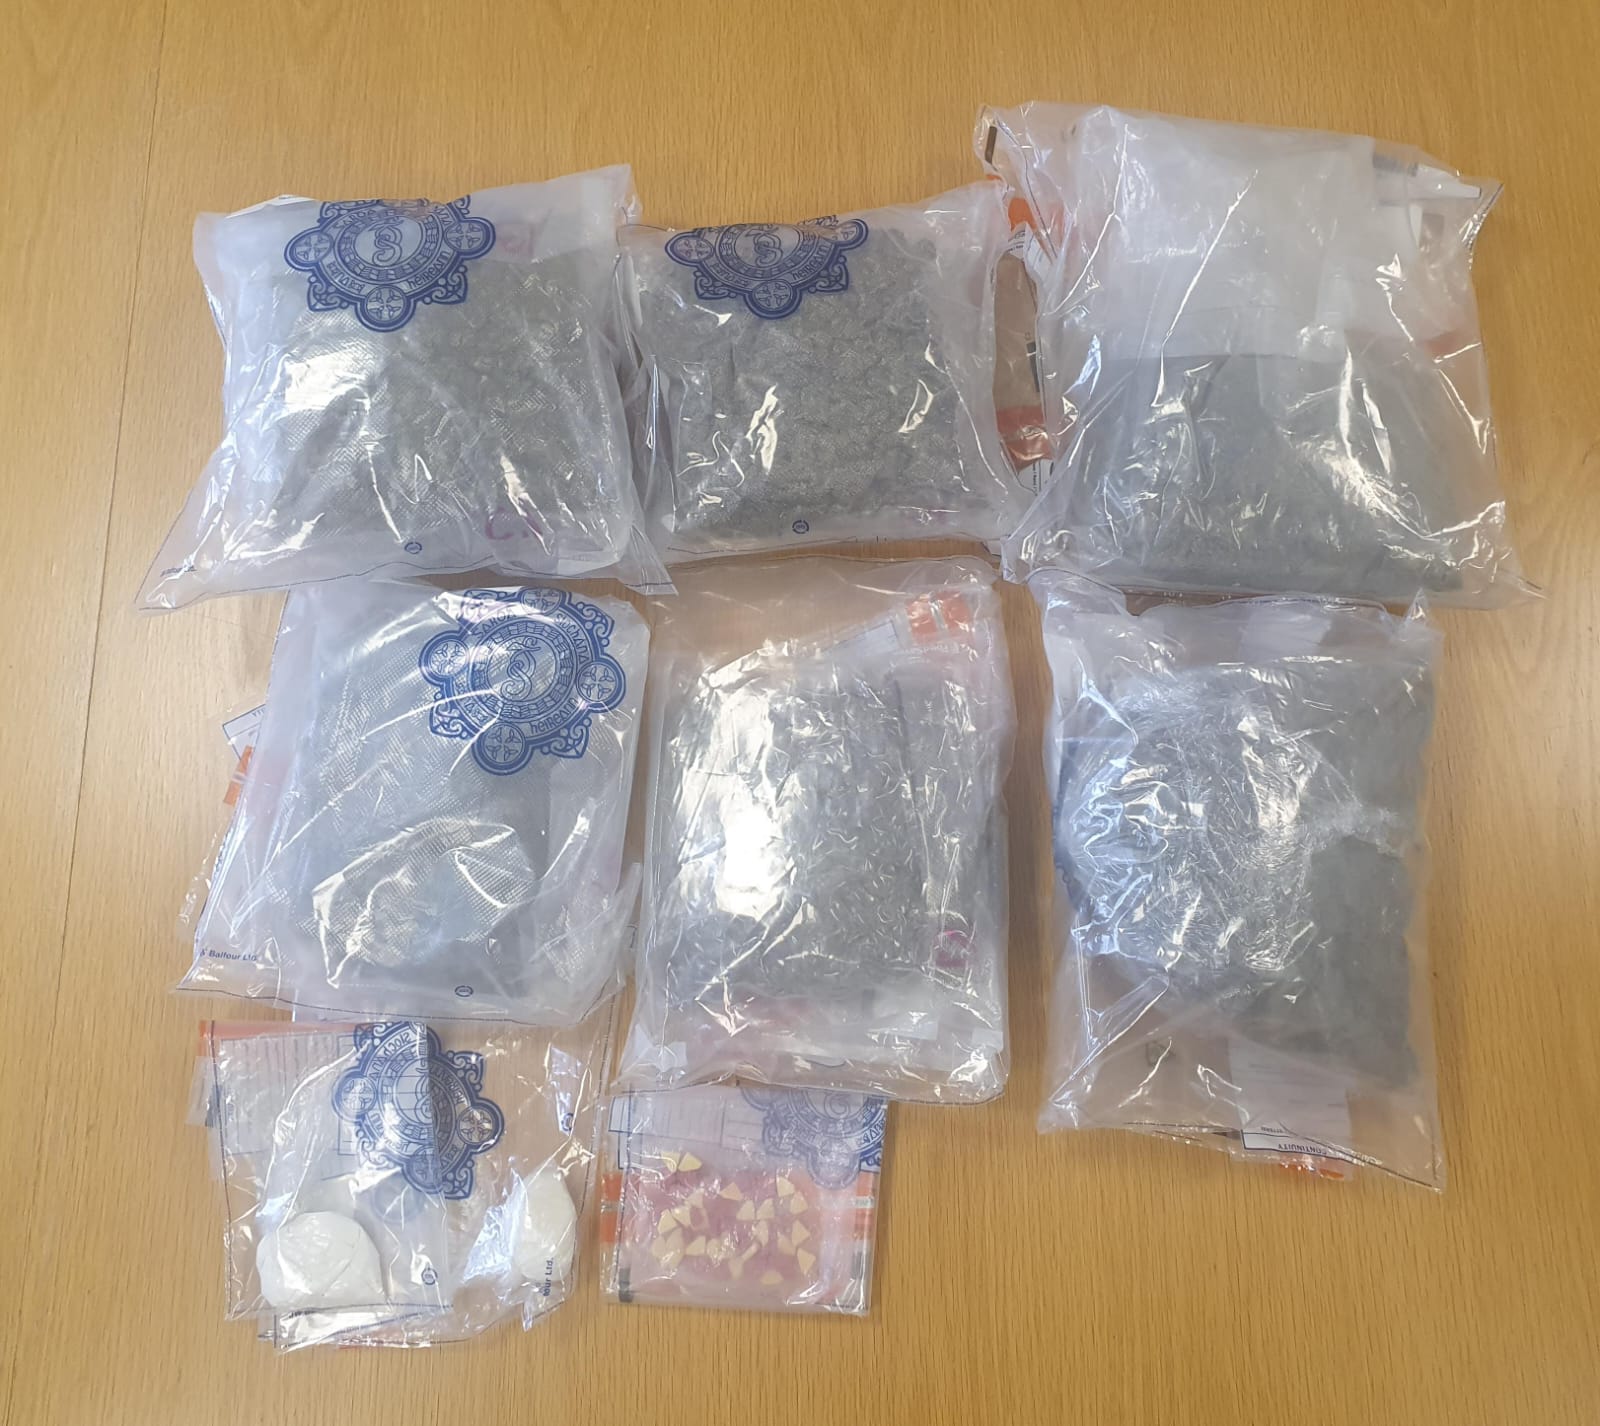 Man due before court after drugs worth in excess of €60,000 seized in Laois